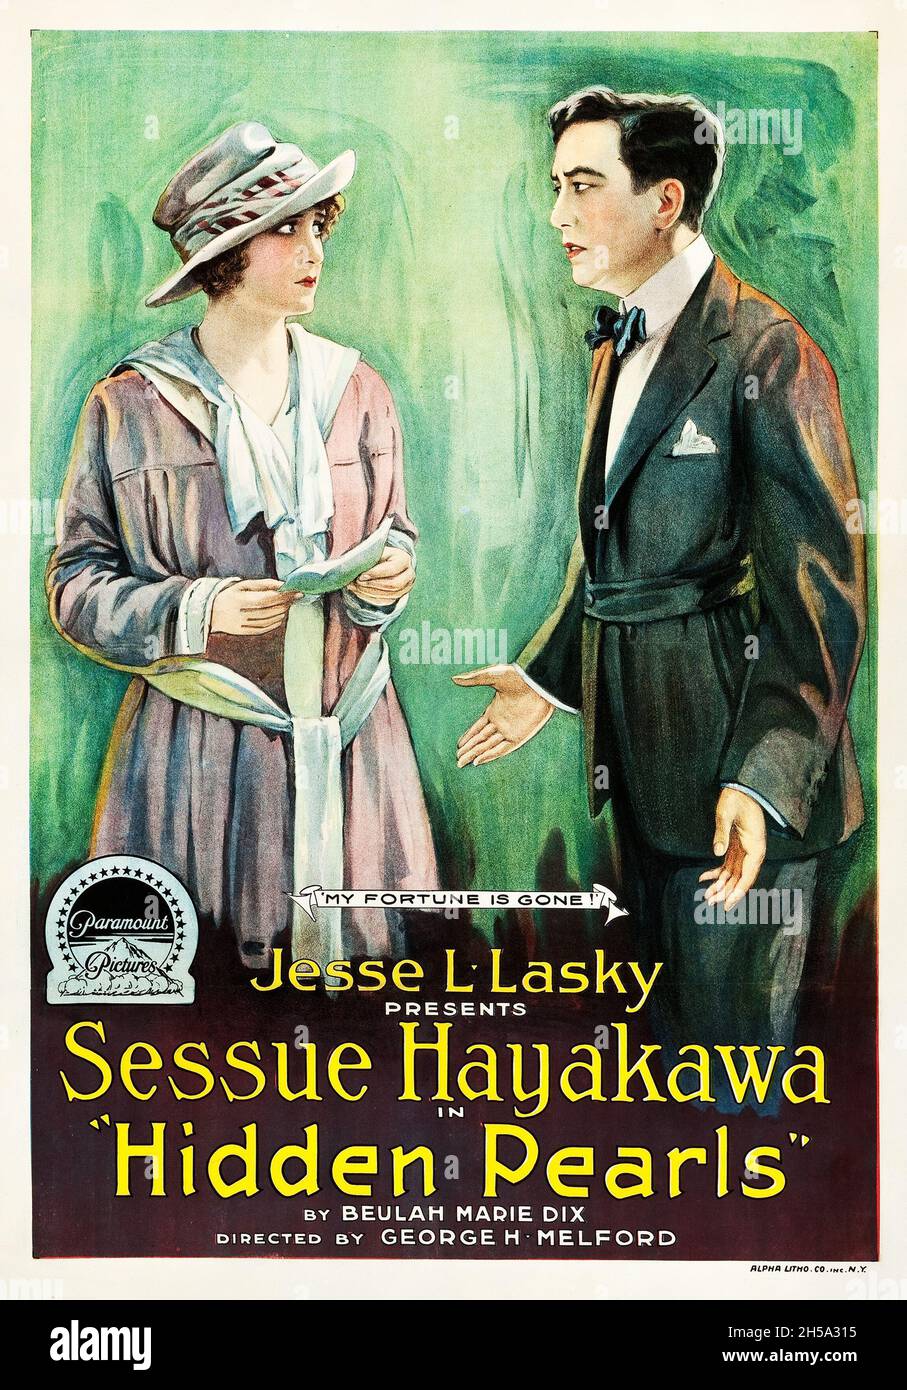 Vintage movie poster for the 1918 film Hidden Pearls feat. Sessue Hayakawa. (Lasky, Paramount). Stock Photo